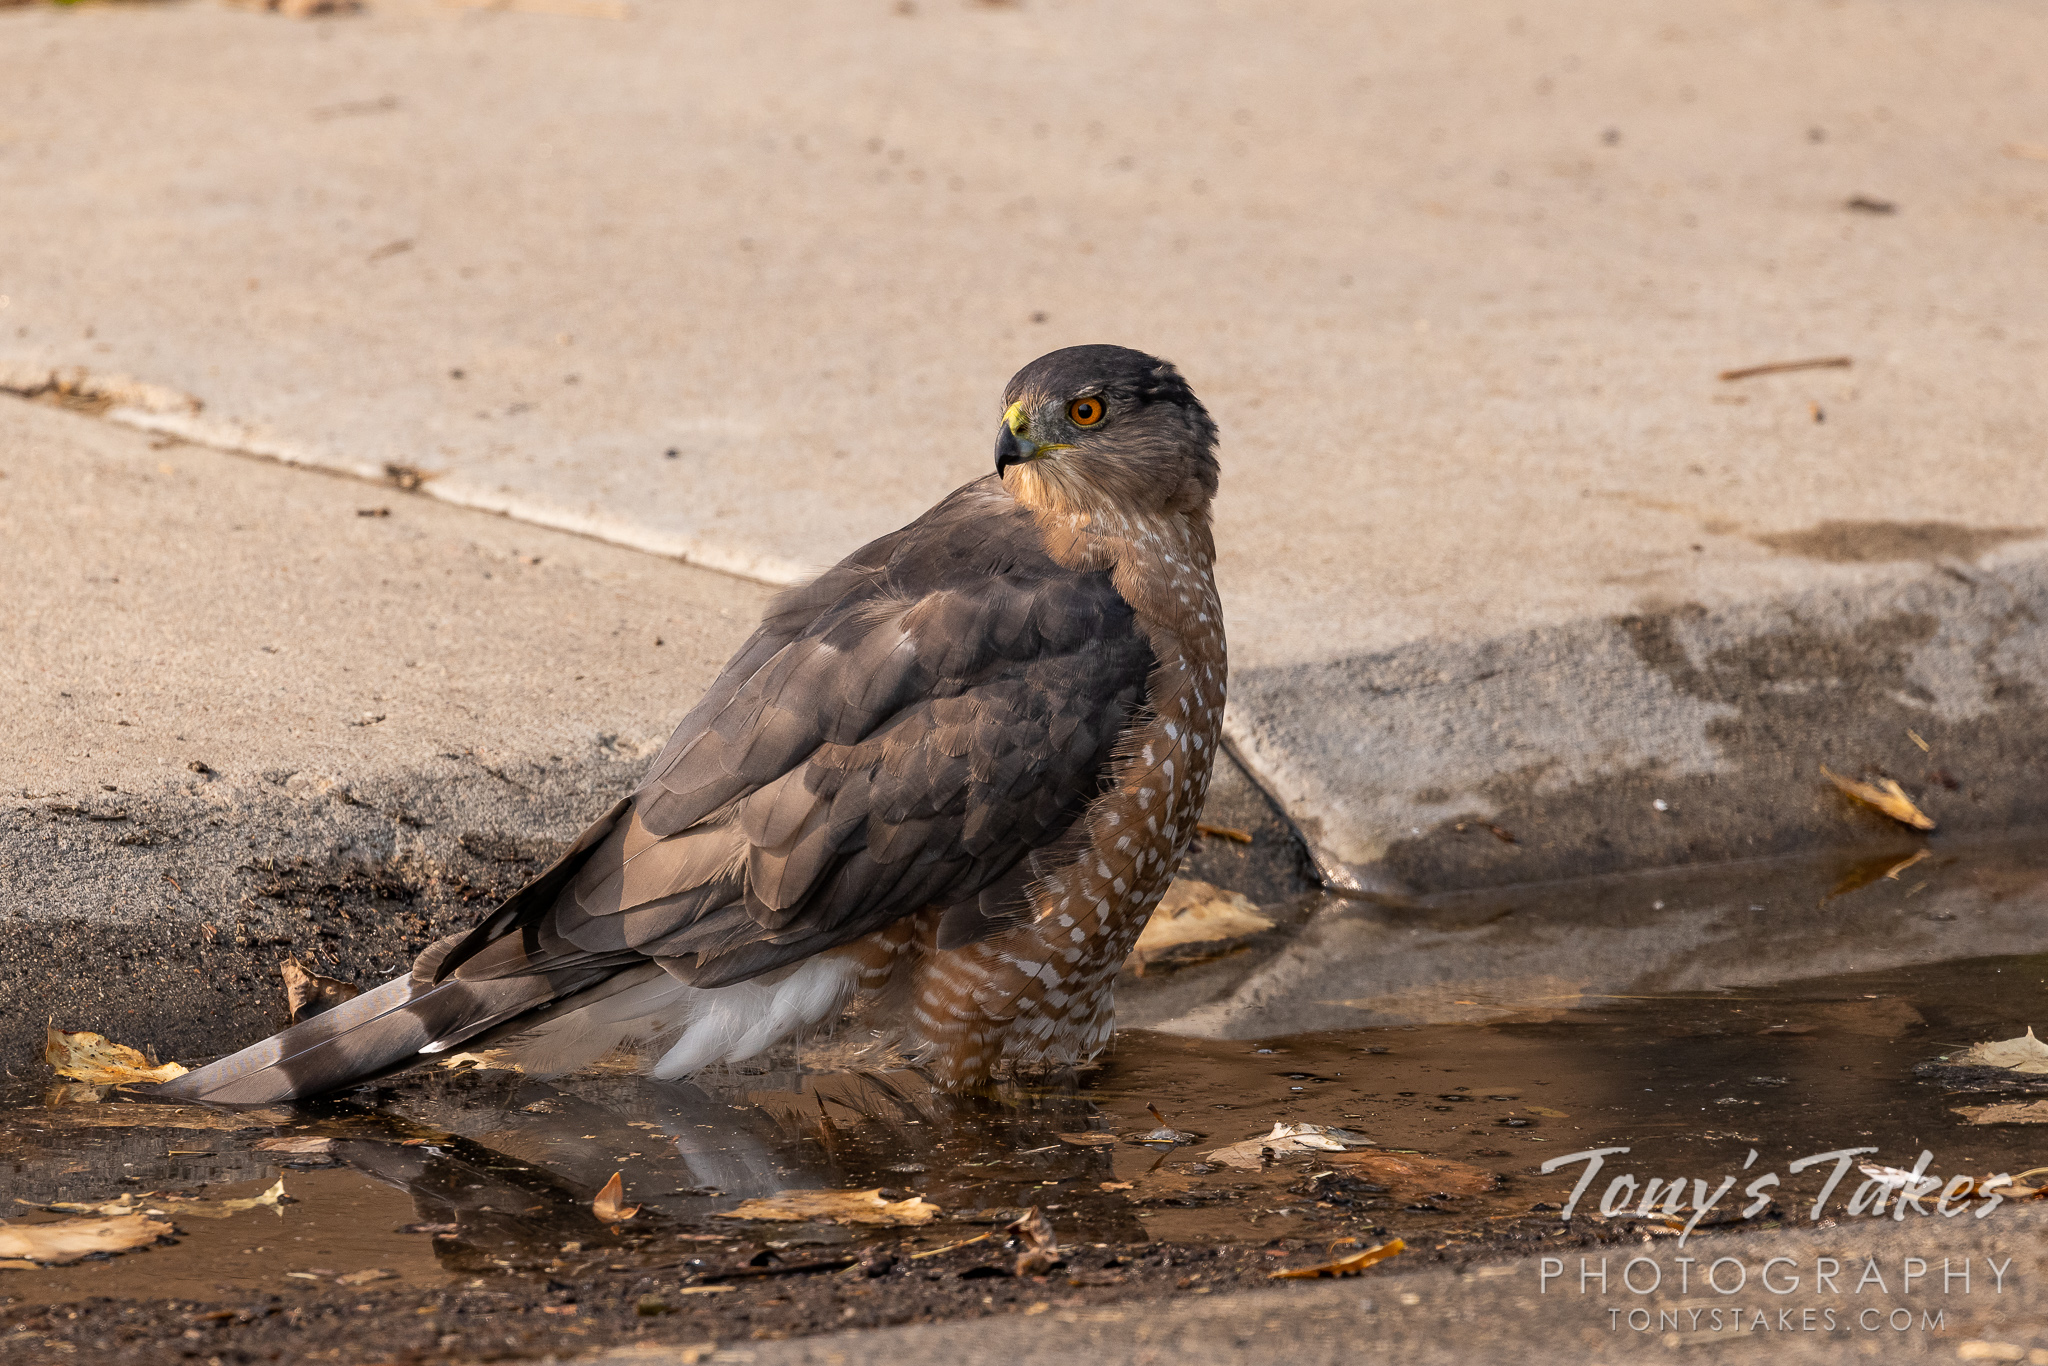 A Cooper's hawk bathes in water in a gutter. (© Tony's Takes)